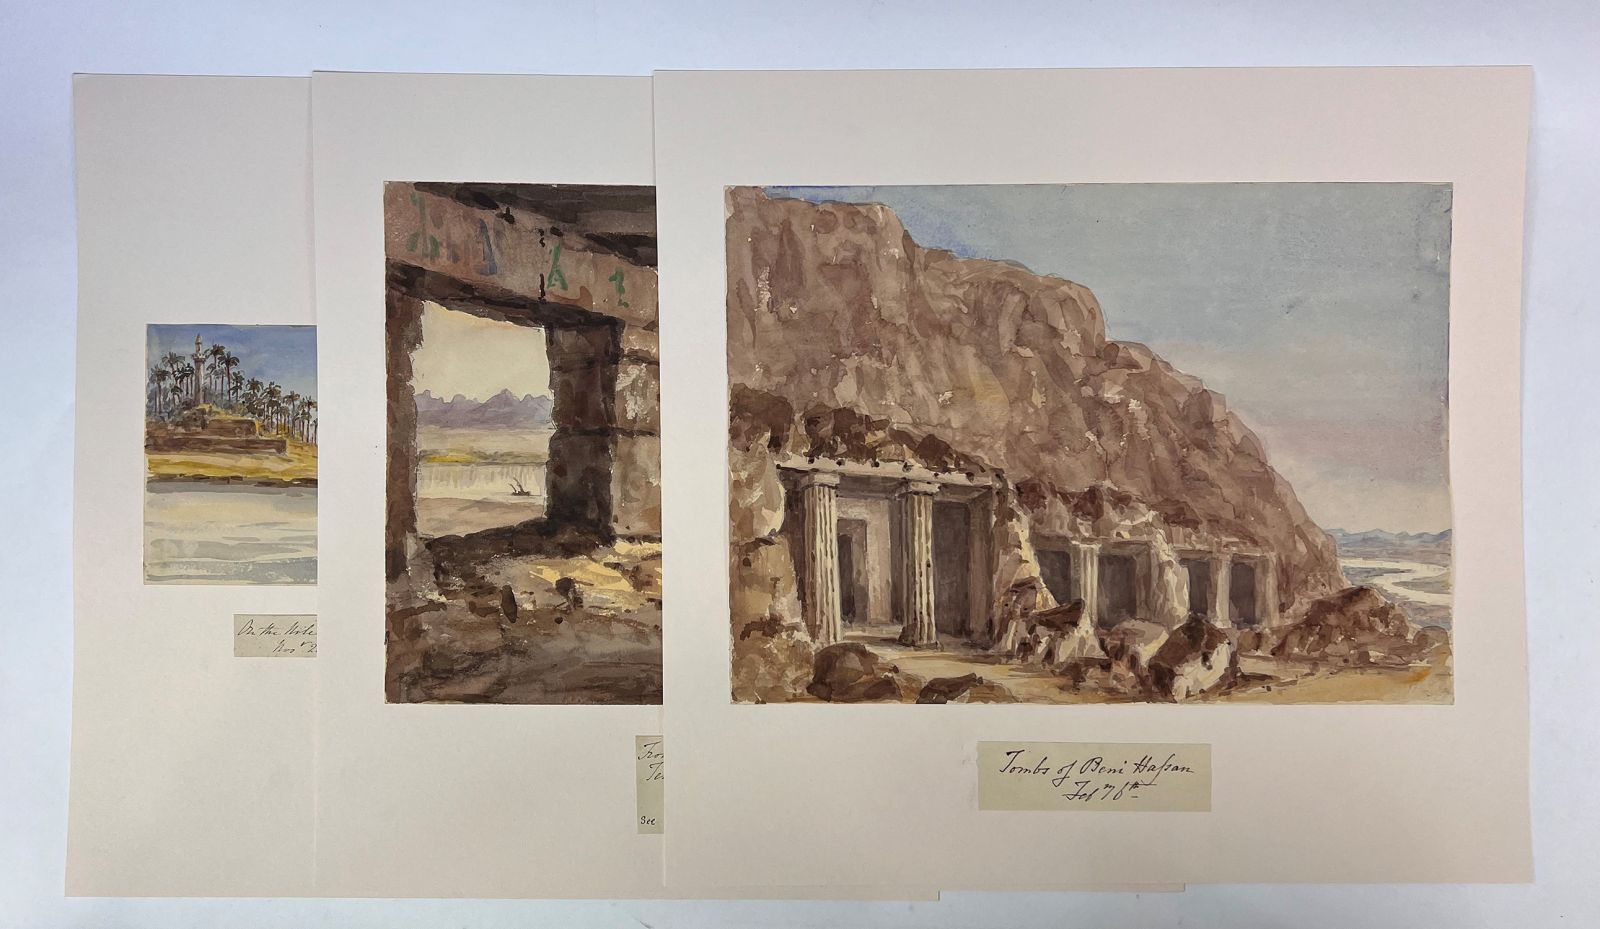 A FINE COLLECTION OF TWENTY-SEVEN EARLY WATERCOLOUR VIEWS OF THE NILE, PRODUCED DURING A WINTER CRUISE IN 1864-65, DEPICTING THE ANCIENT SITES AND LANDSCAPES OF UPPER EGYPT, NUBIA, AND THE SECOND CATARACT -  image 2